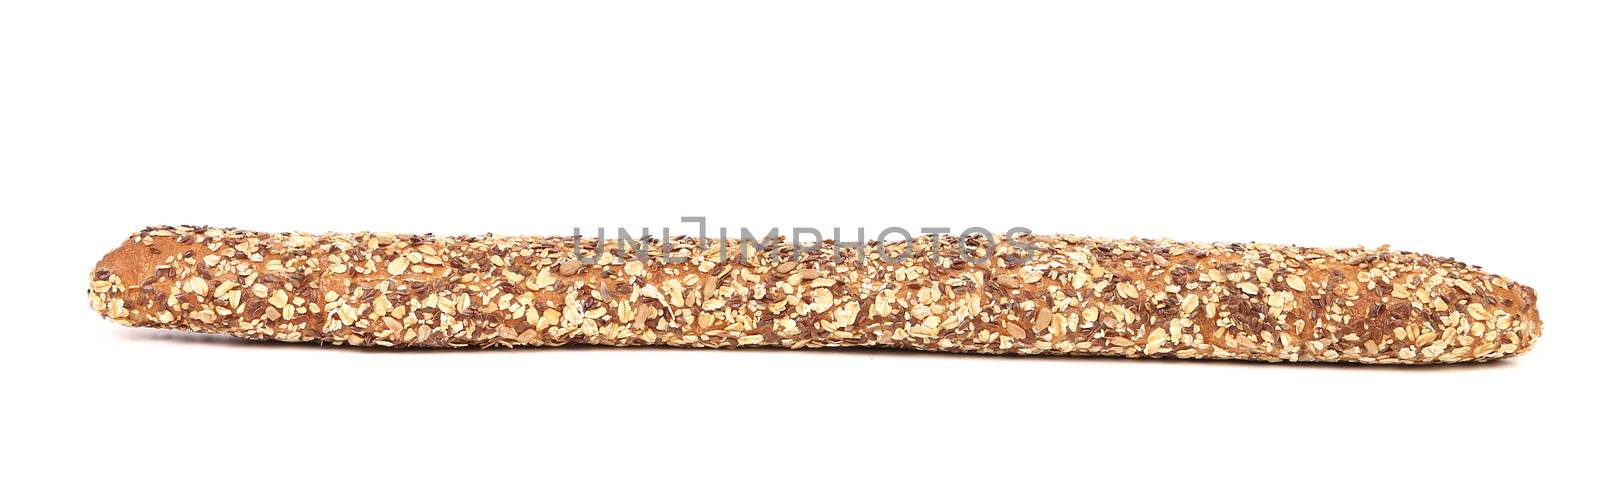 Baguette with cereals. Isolated on a white background.